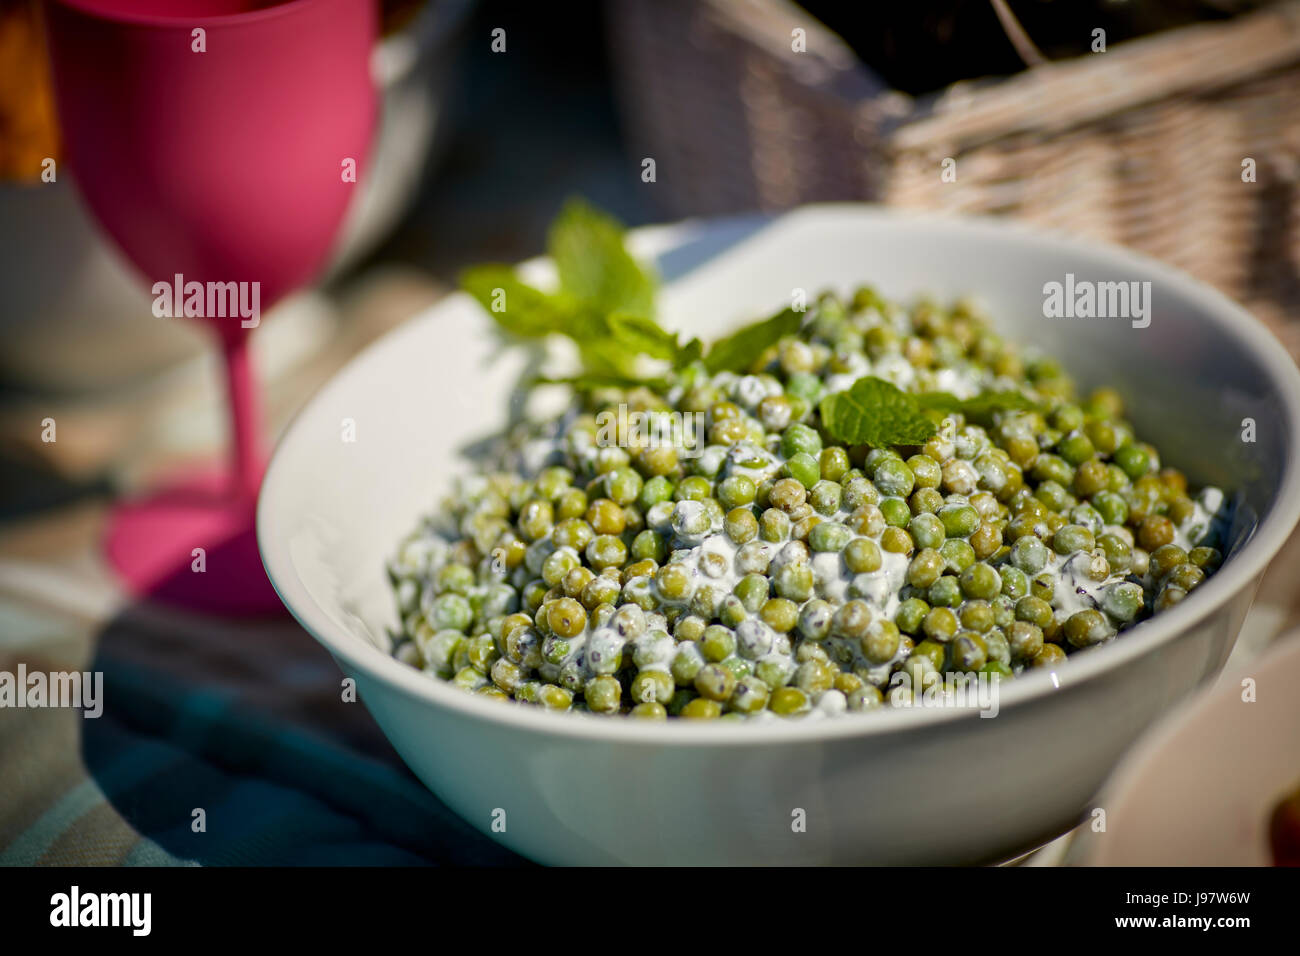 Traditional picnic food, with healthy options.peas with a dressing Stock Photo